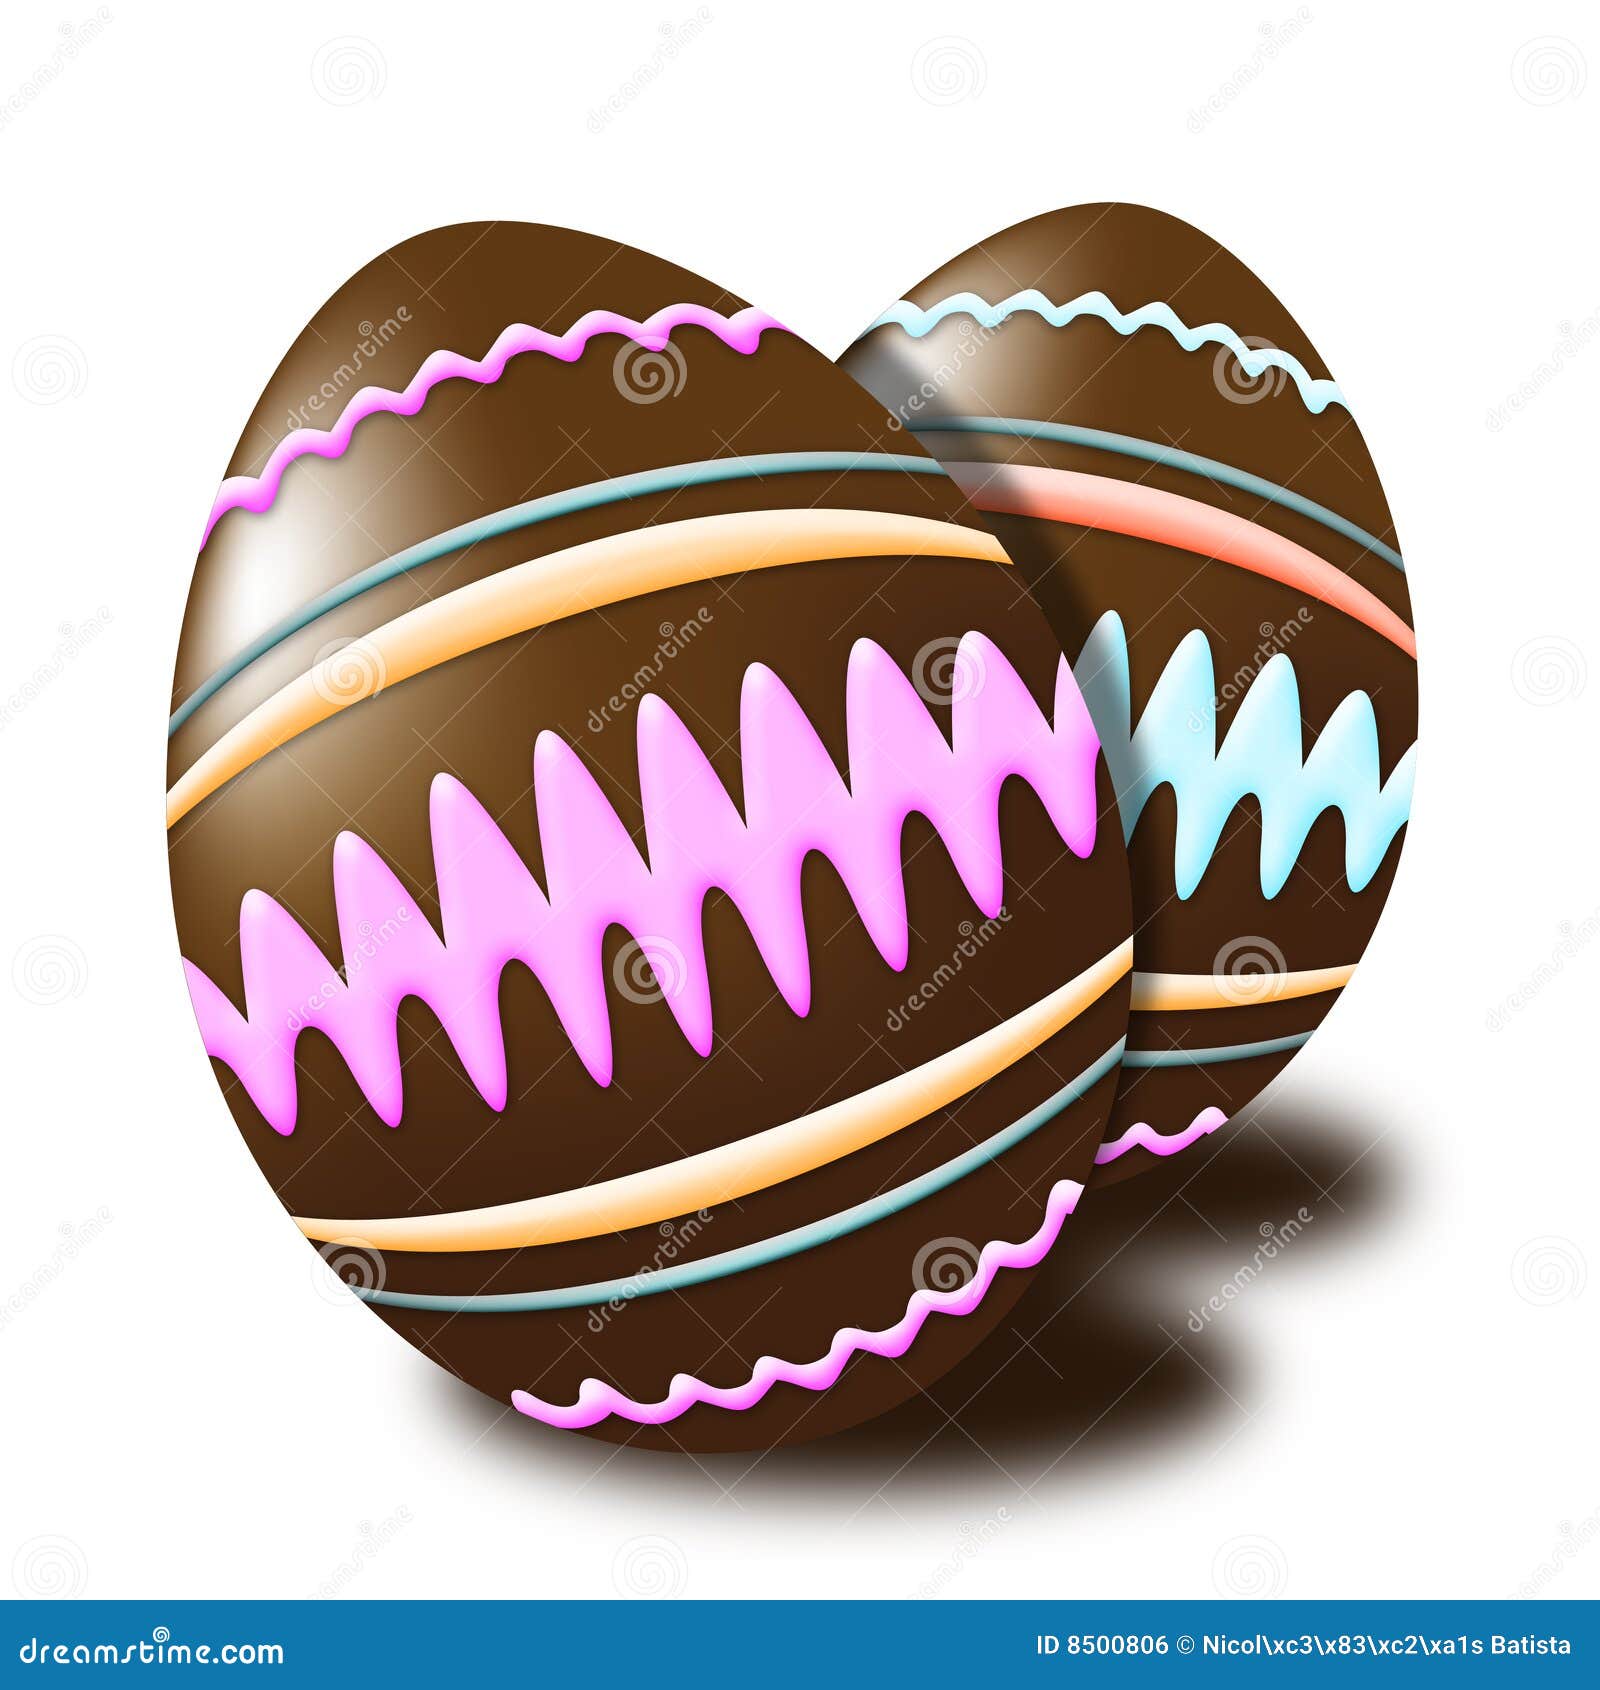 clipart chocolate easter eggs - photo #36